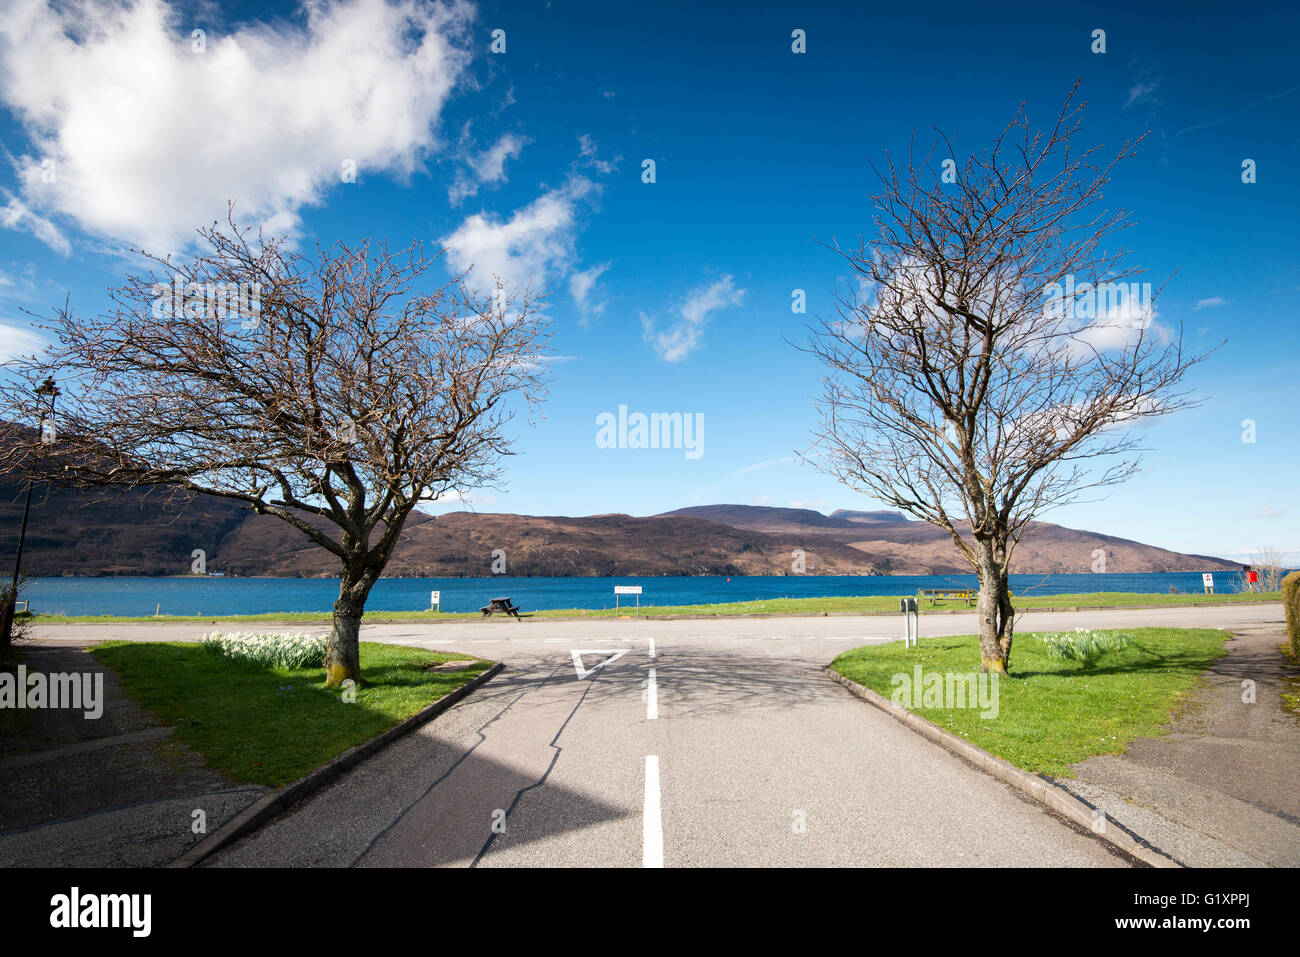 Looking out onto Loch Broom from a street in Ullapool, Wester Ross Scotland UK Stock Photo